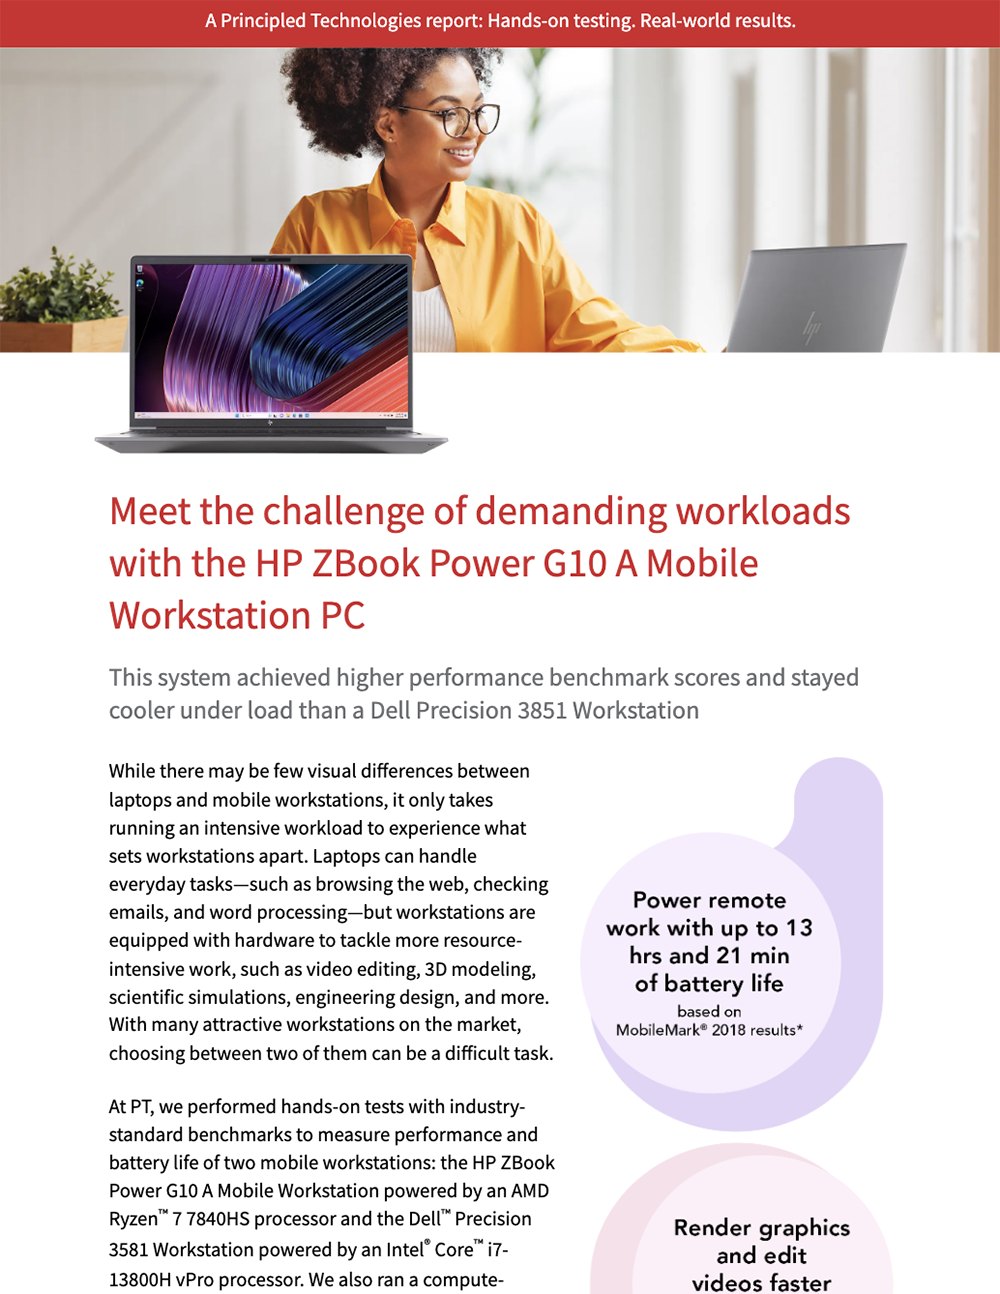 Meet the challenge of demanding workloads with the HP ZBook Power G10 A Mobile Workstation PC